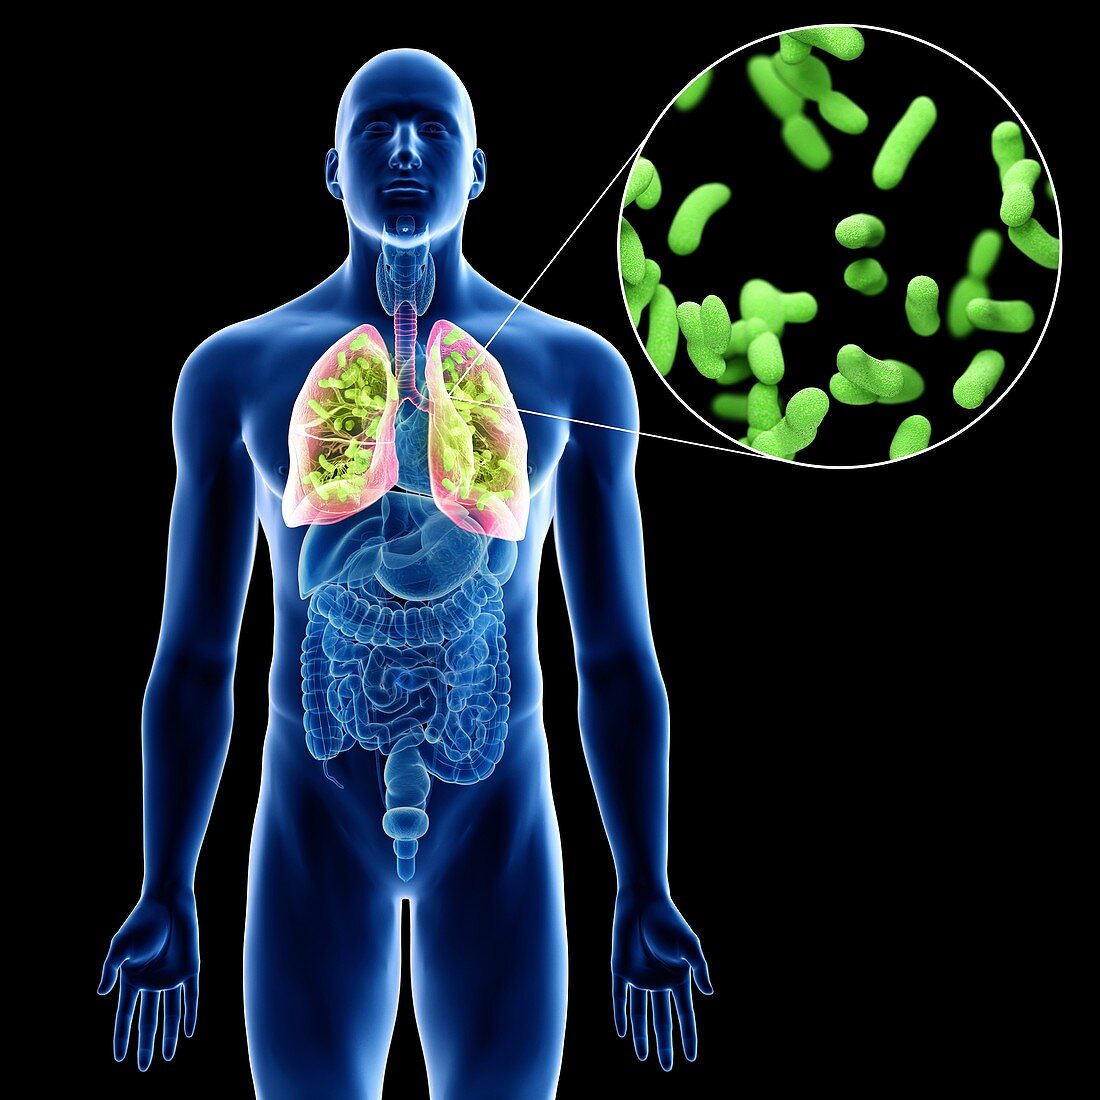 Illustration of a man's lung infection